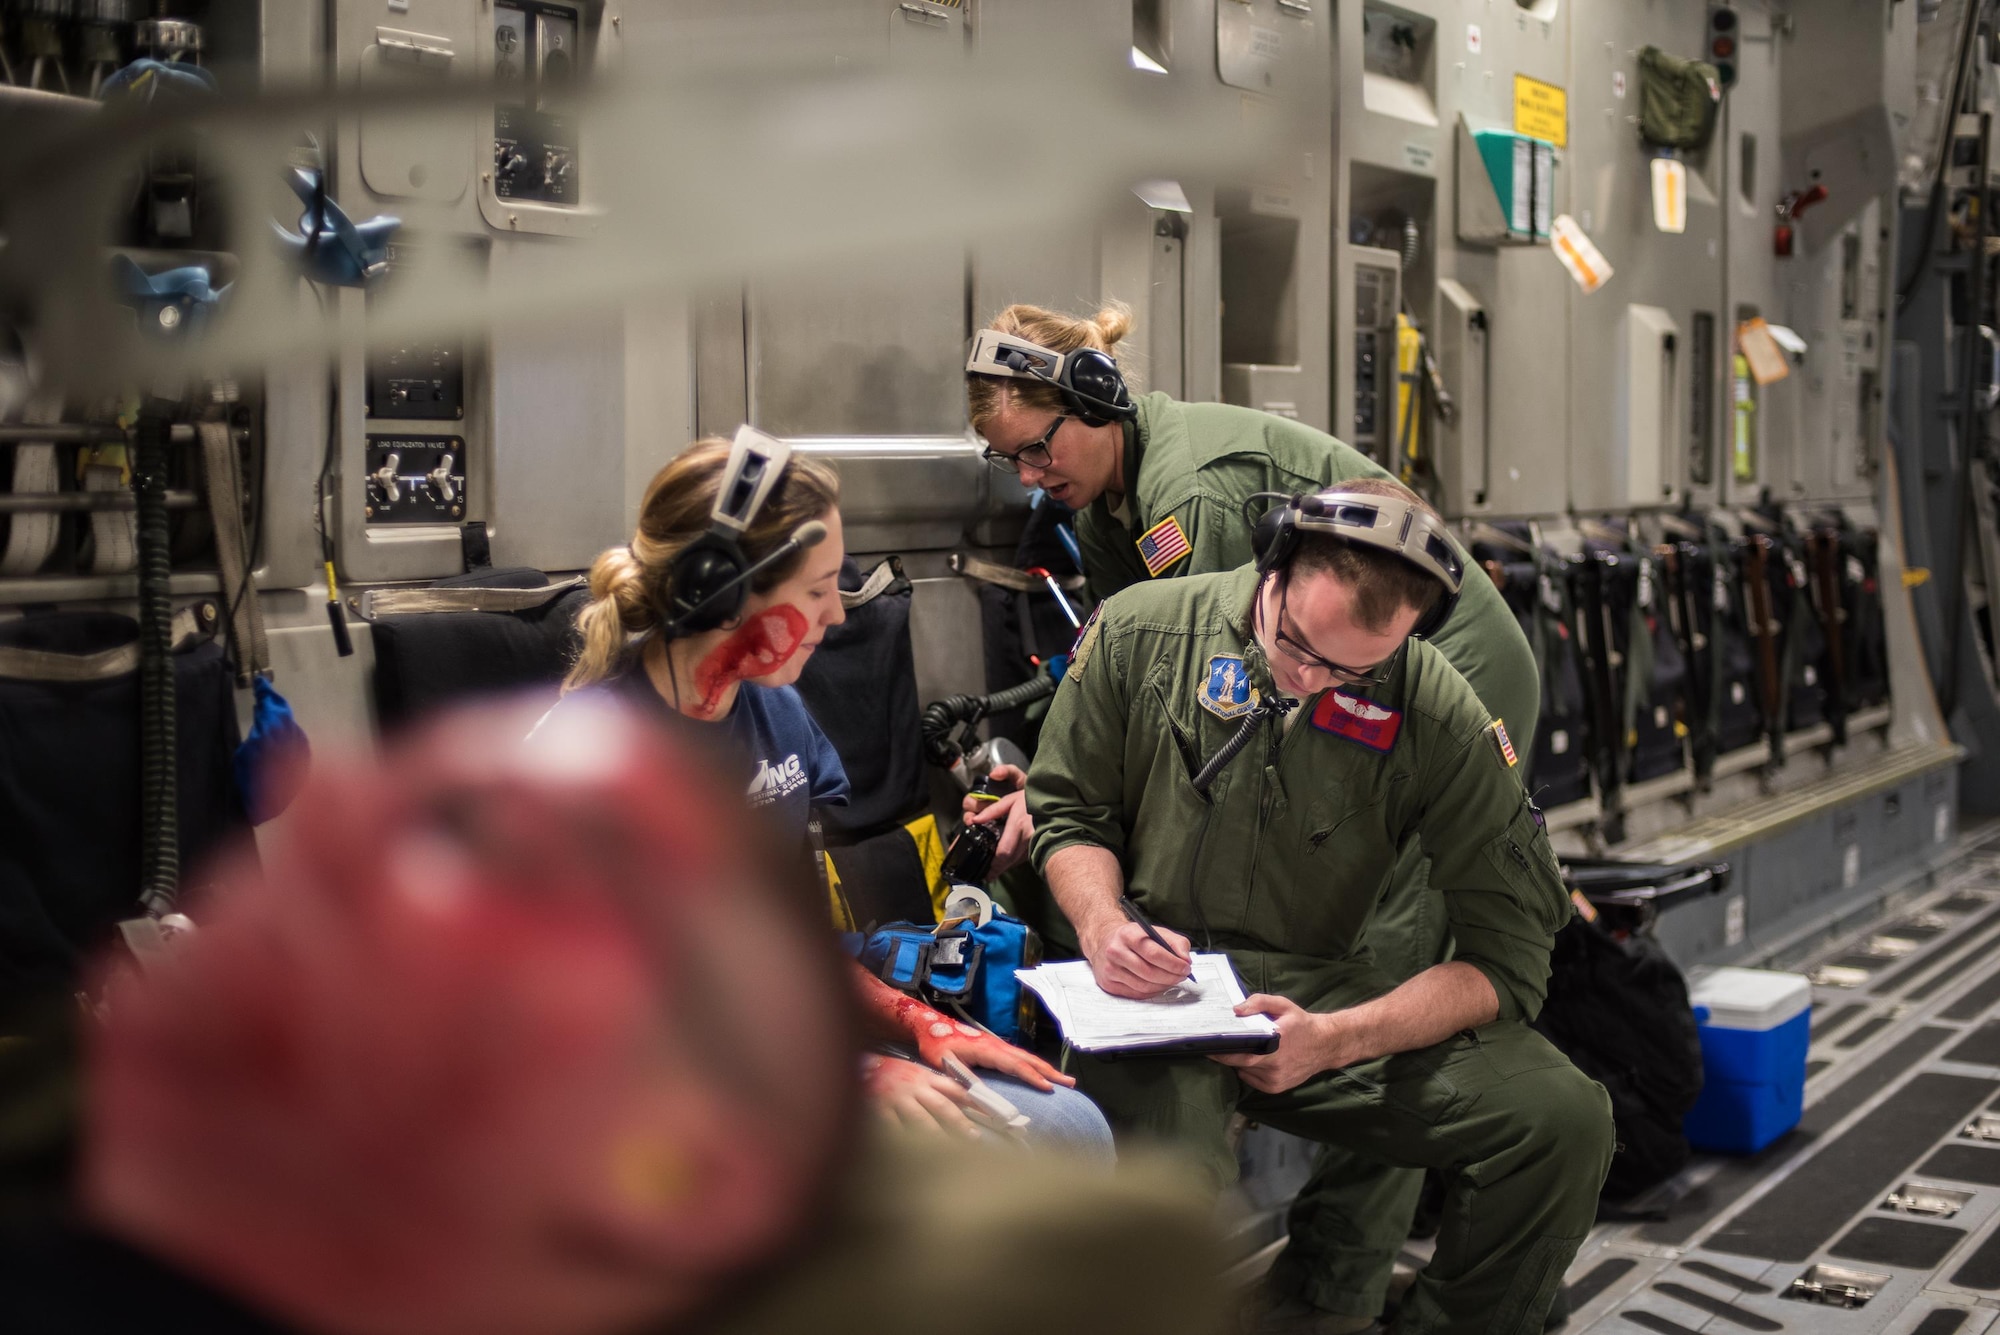 Staff Sgt. Avery Keller, an aeromedical evacuation technician from the 137th Aeromedical Evacuation Squadron, Will Rogers Air National Guard Base, Oklahoma City, completes medical documentation for a simulated burn patient, Senior Airman Ashleigh Duncan from the 137th Special Operations Logistics Readiness Squadron, while transporting patients with burn moulage aboard a C-17 Globemaster III from the 105th Airlift Wing, Stewart Air National Guard Base, N.Y., en route to Altus Air Force Base, Altus, Okla., Oct. 30, 2017. The flight was part of a wildfire scenario during Vigilant Guard, a North American Command-sponsored, state-wide emergency response exercise held Oct. 30 to Nov. 2, 2017. (U.S. Air National Guard photo by Staff Sgt. Kasey M. Phipps)